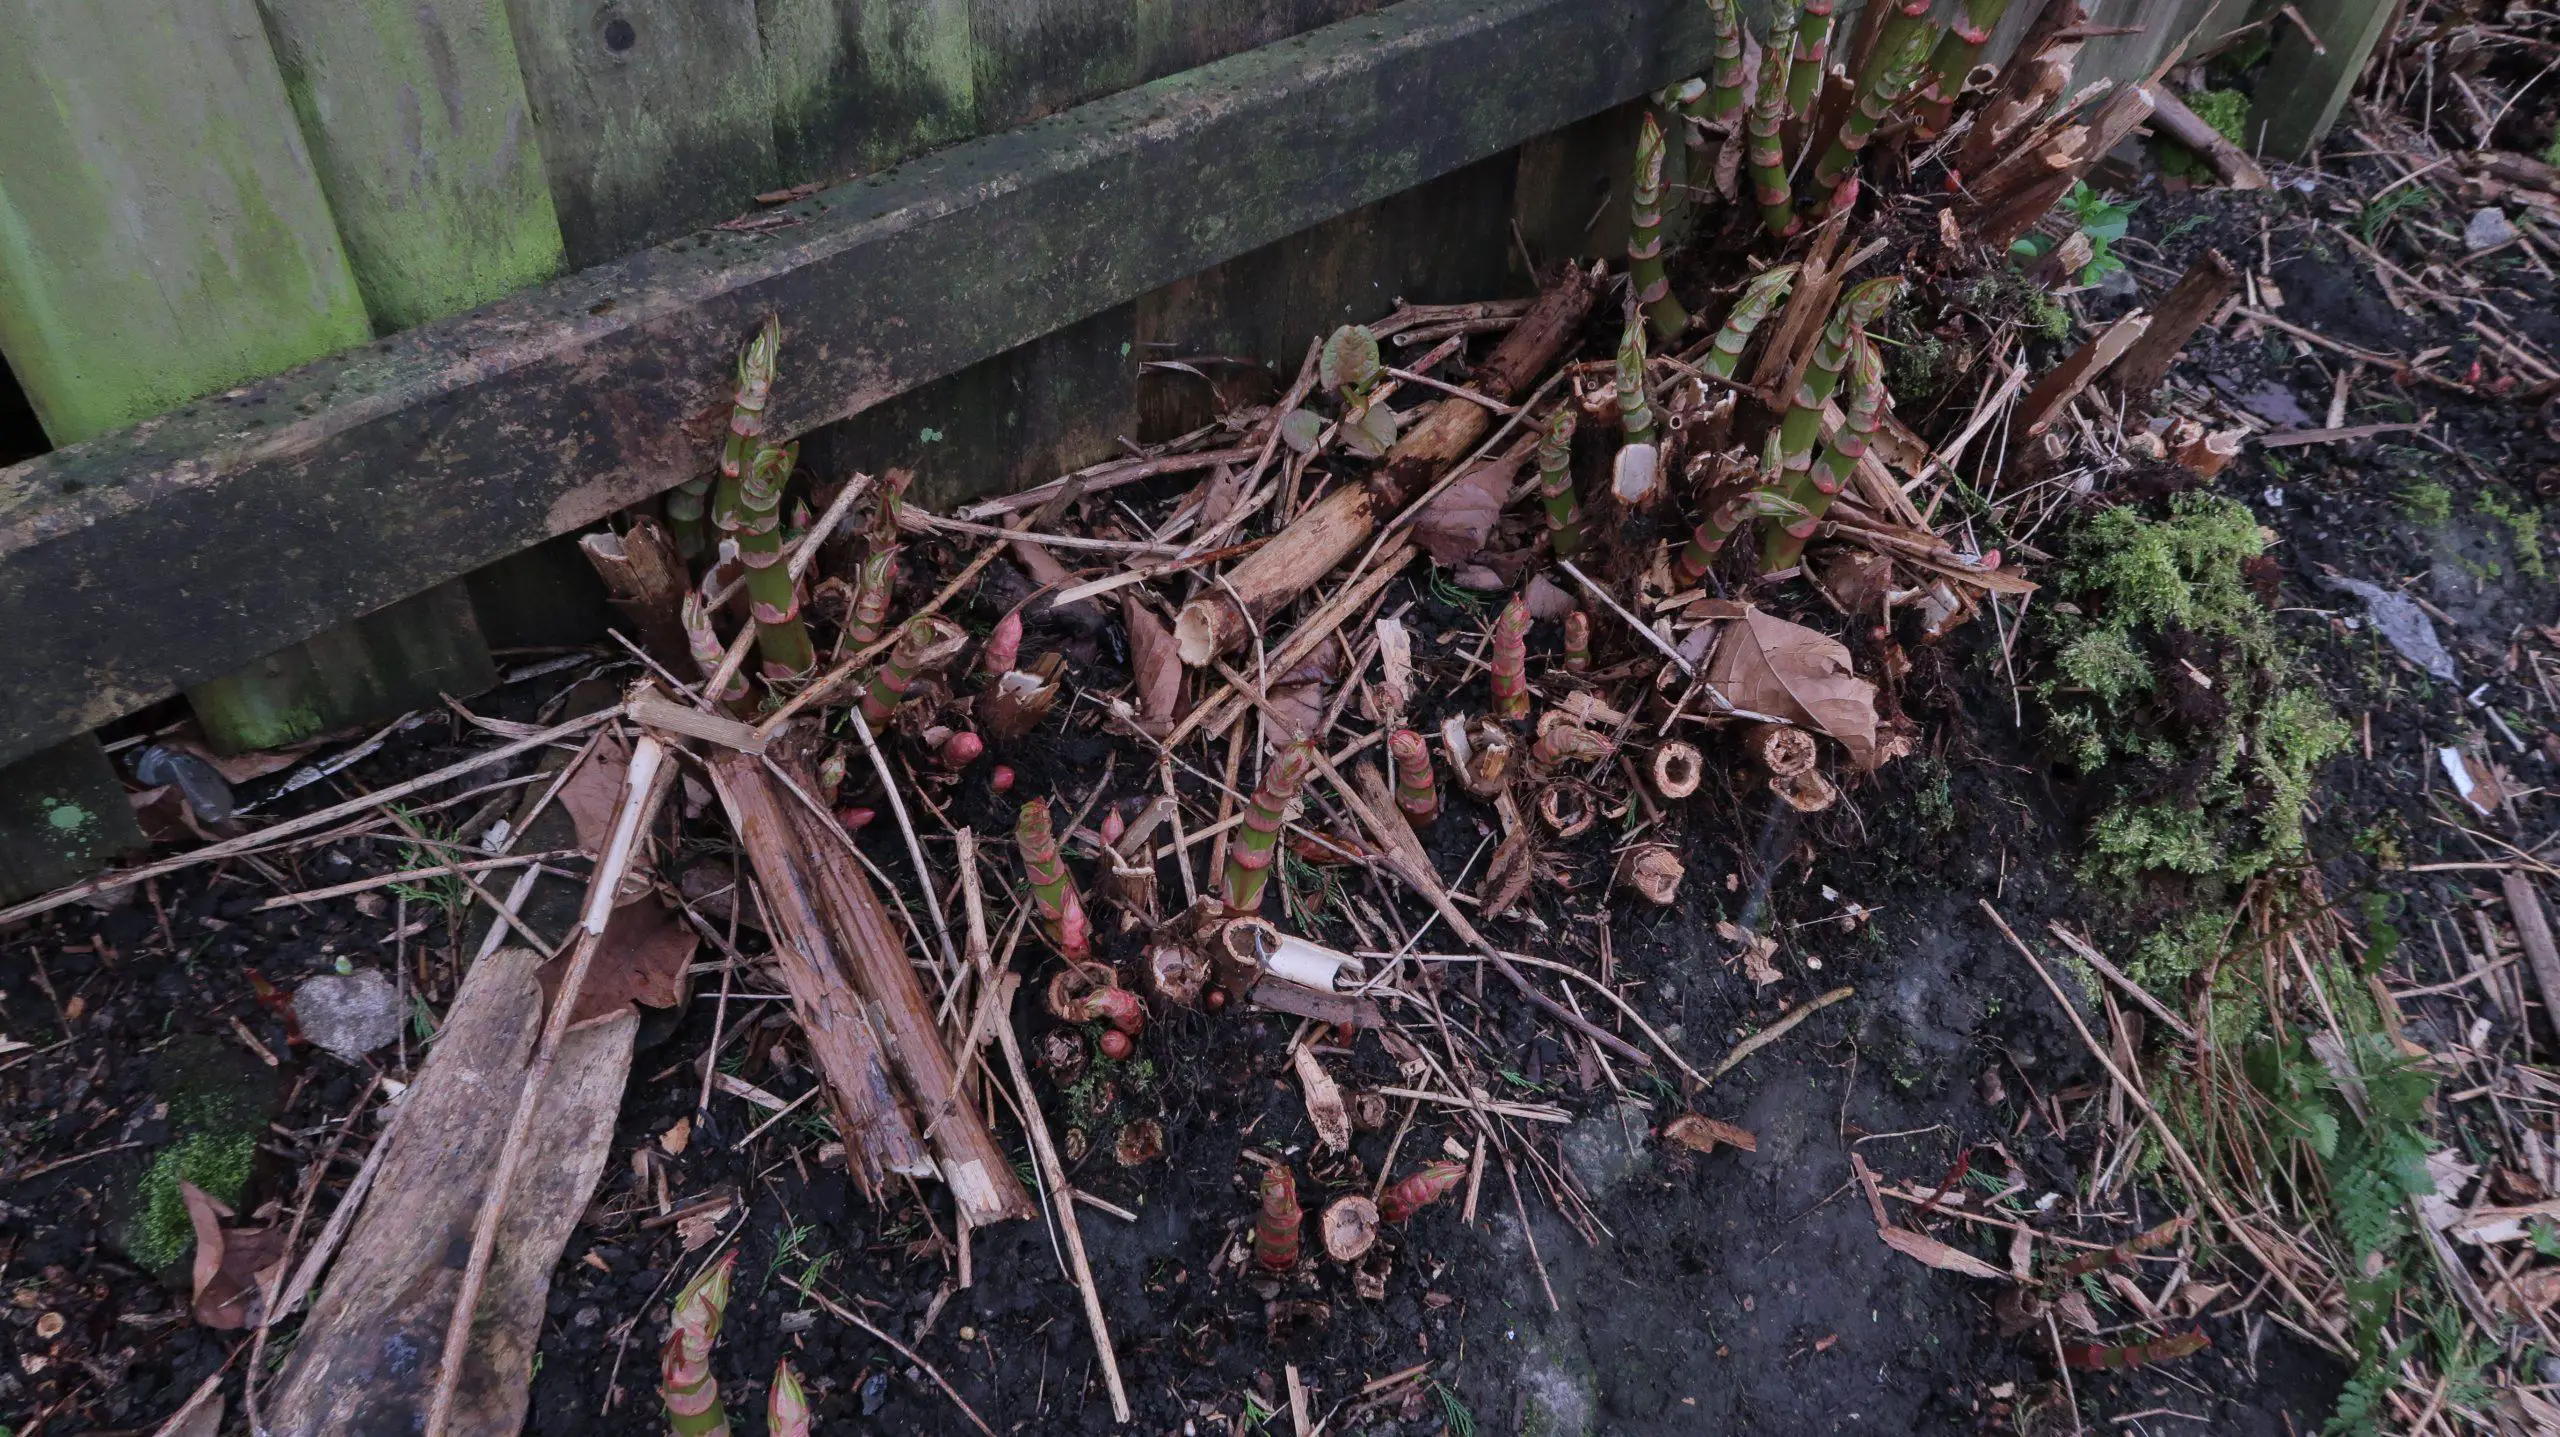 Japanese knotweed crowns contribute to soil erosion and nutrient deficiency within the soil